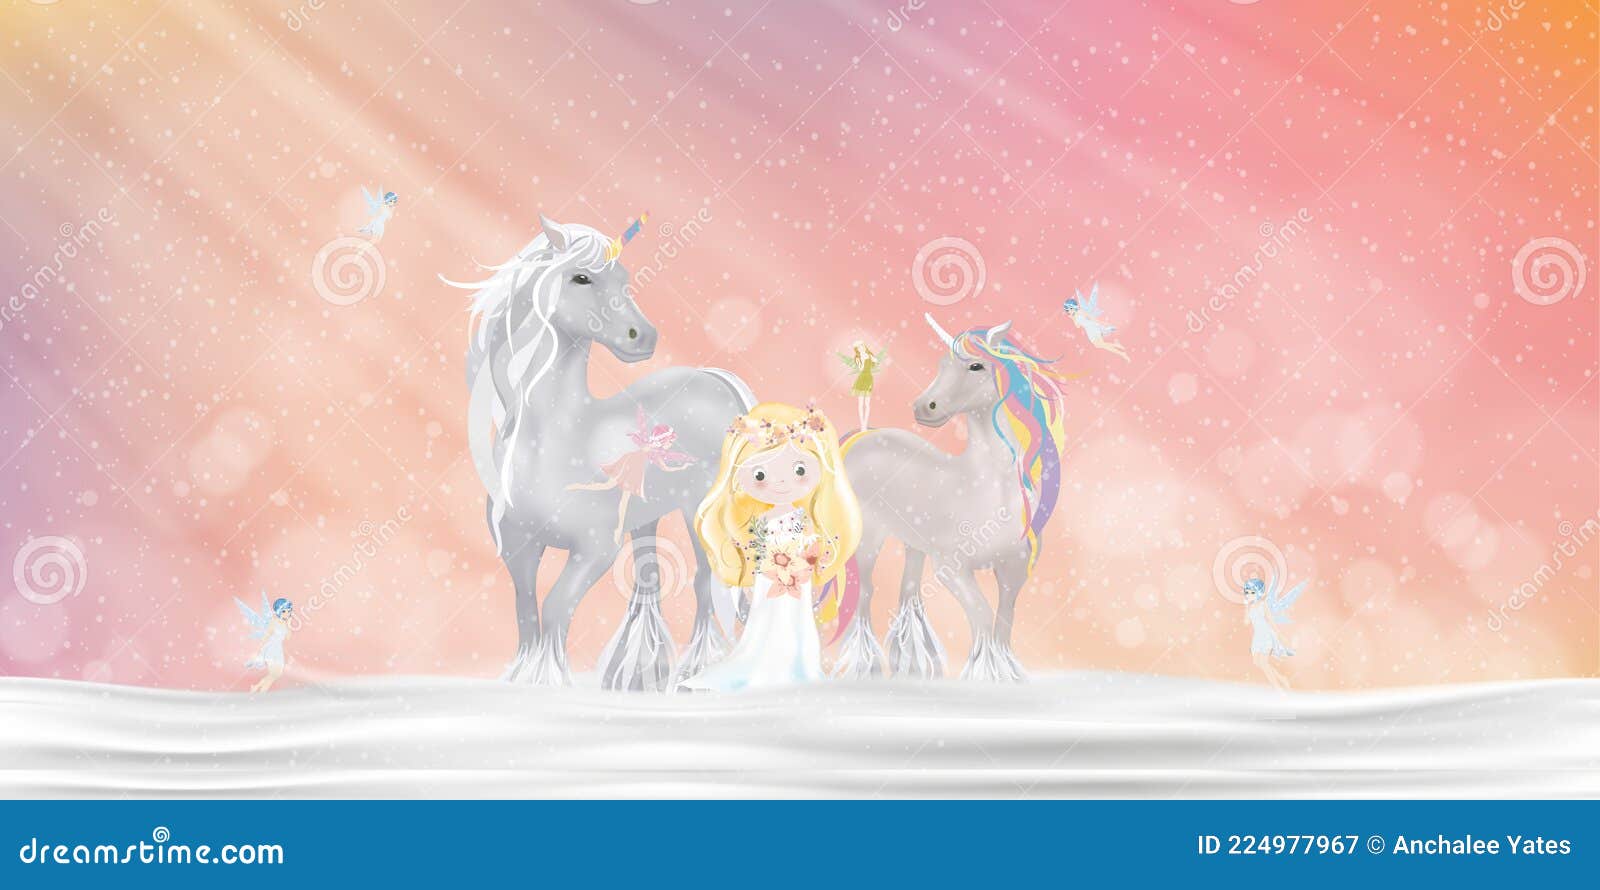 Unicorn with Little Fairies Flying and Cute Princess Walking on Snow at Magic  Wonderland,Cartoon Fantasy Winter Landscape for Stock Vector - Illustration  of kawaii, happy: 224977967